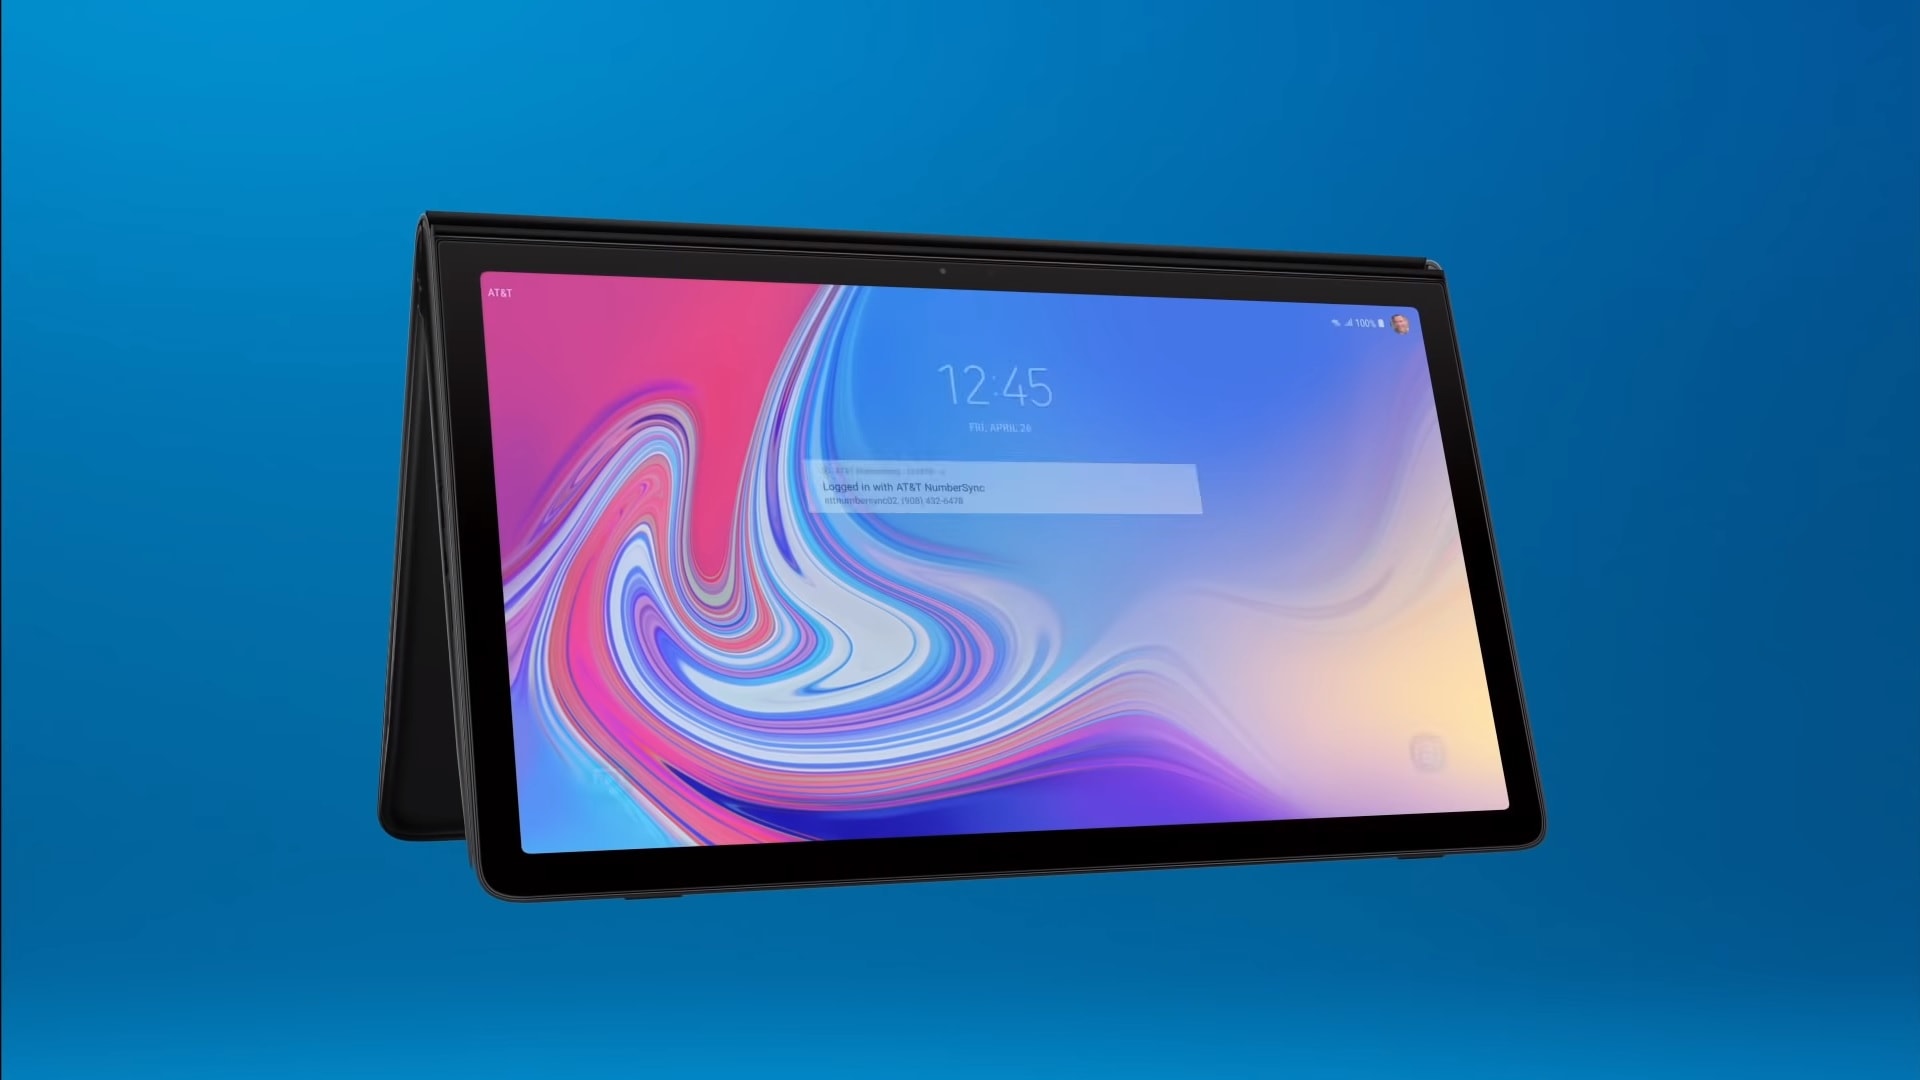 Official render of the Samsung Galaxy View 2 from AT&T